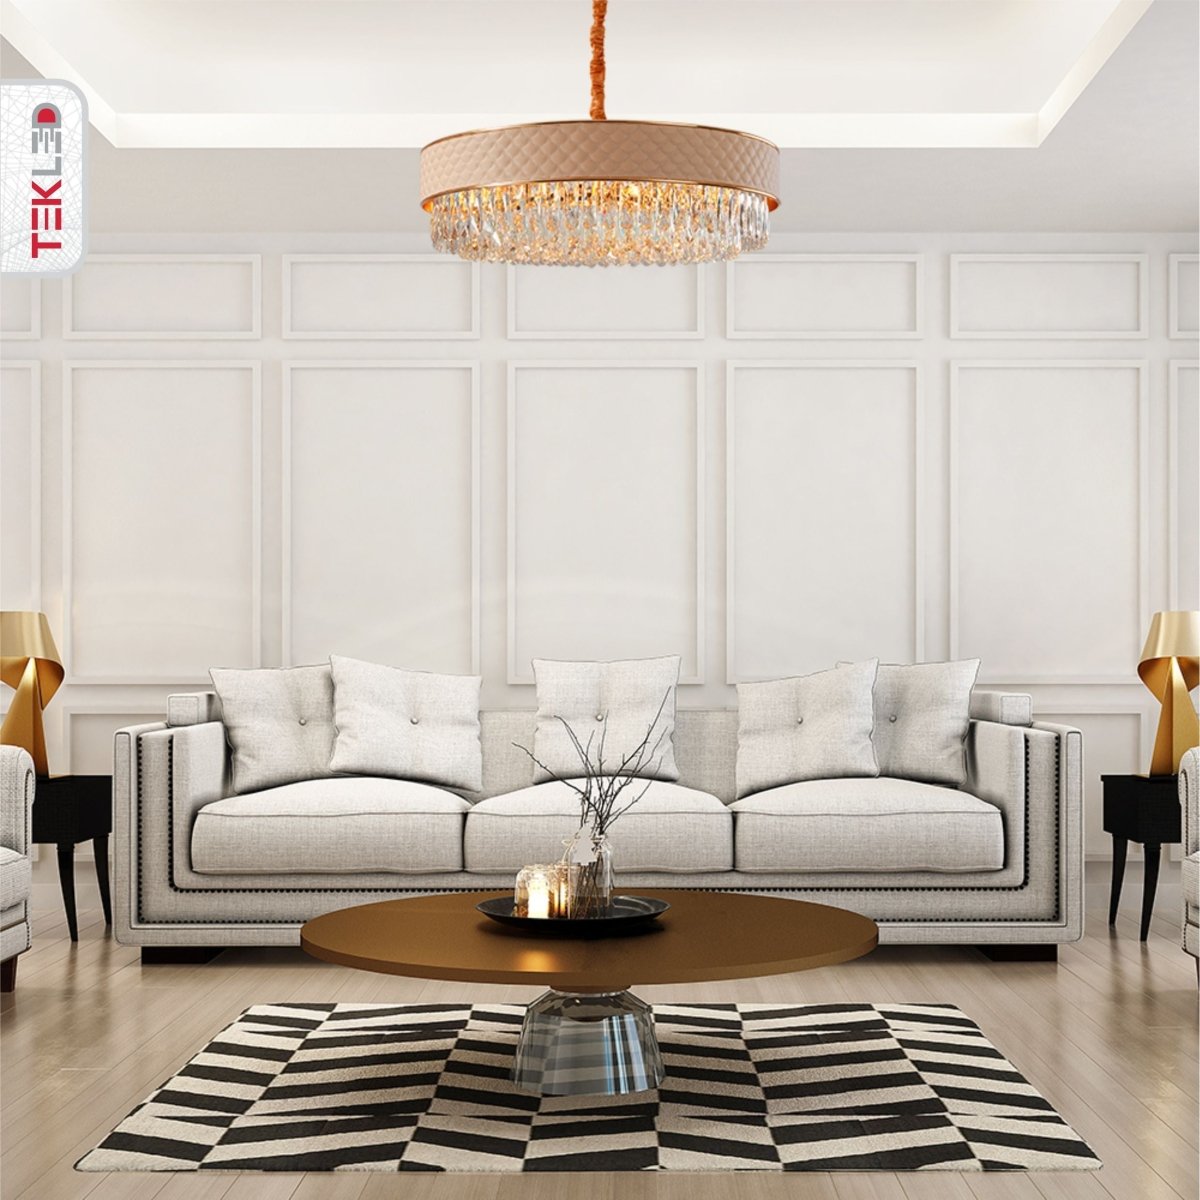 More interior usage of Gold Metal Cream Leather Crystal Chandelier D800 with 15xE14 Fitting | TEKLED 158-19860